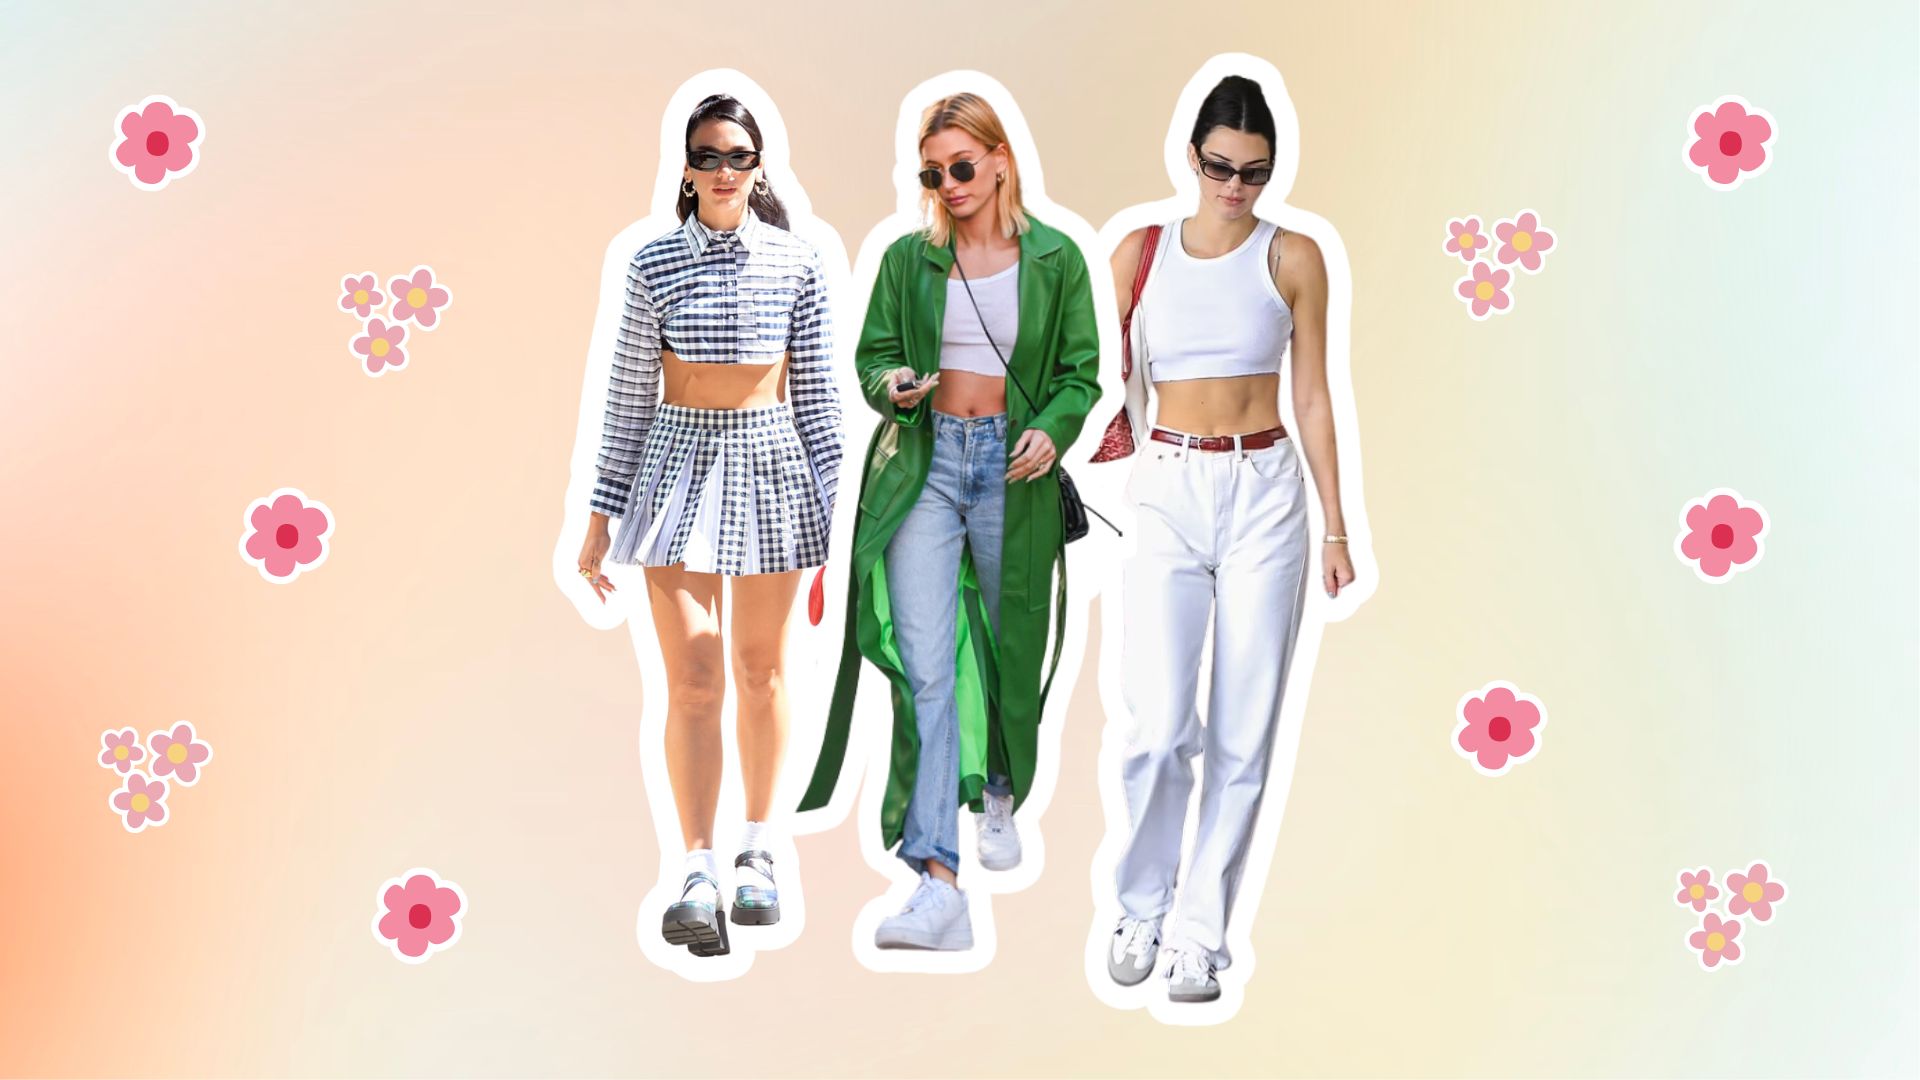 10 Pink Skirt Outfits to Recreate and Make Your Own